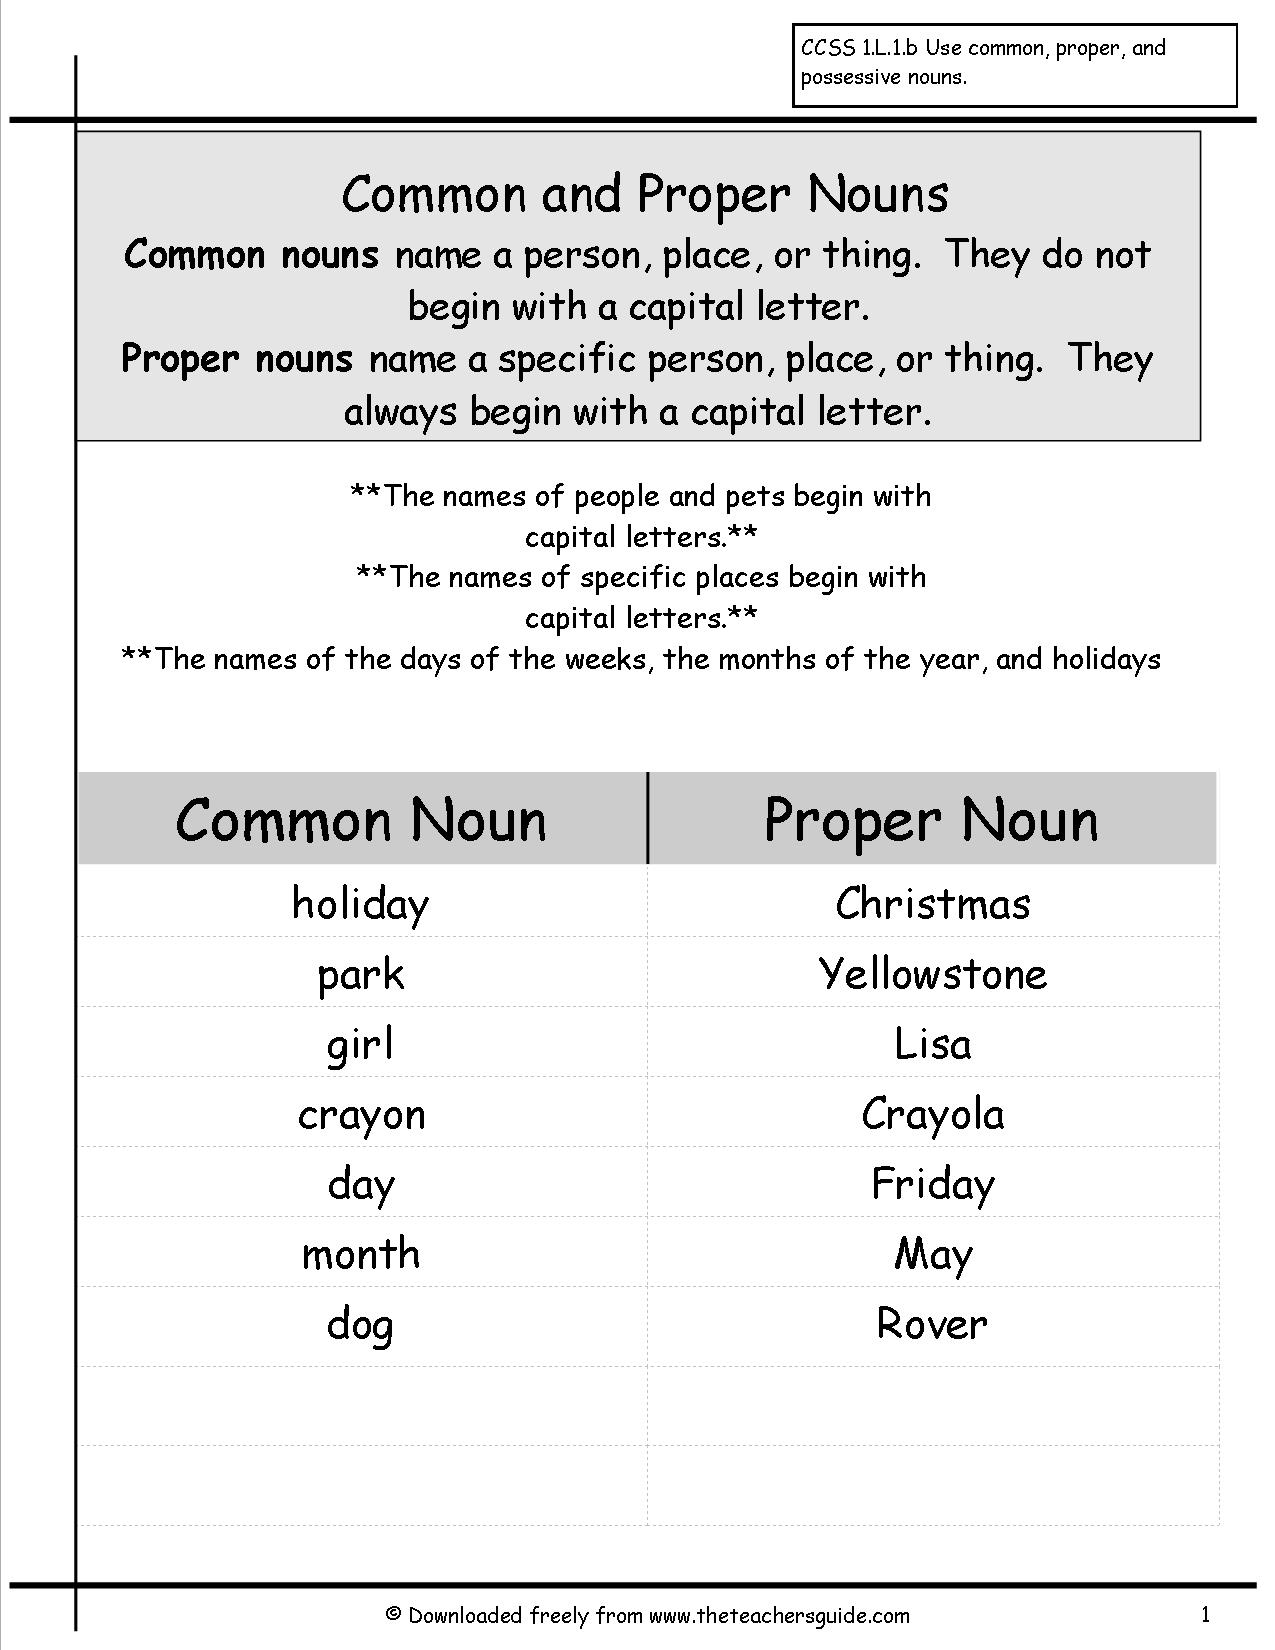 Common Noun And Proper Noun Worksheet For Class 2 With Answers